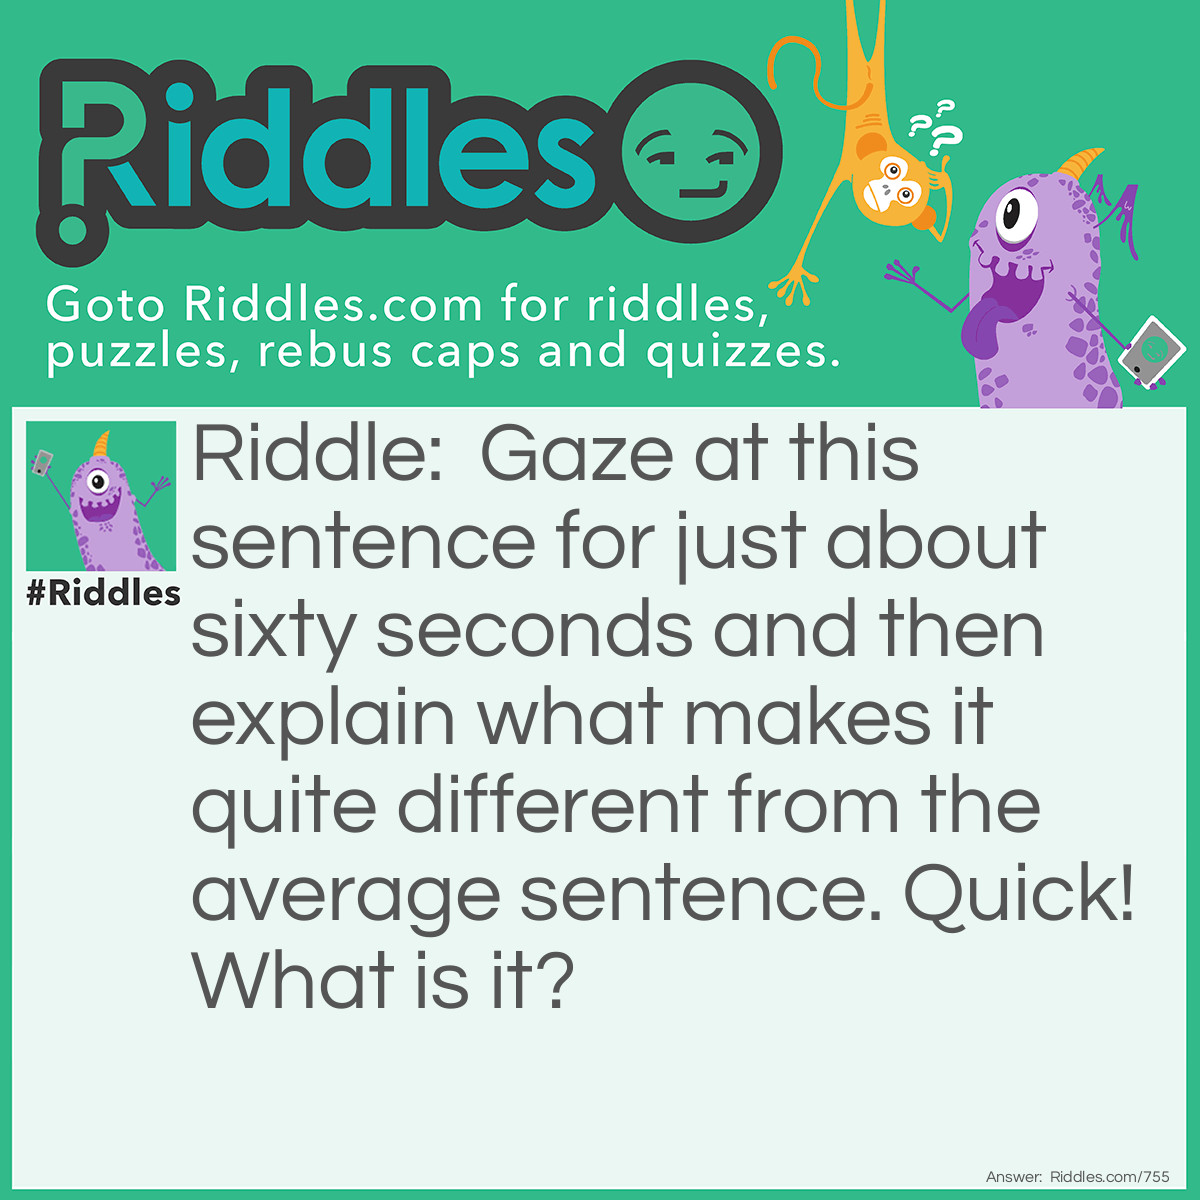 Riddle: Gaze at this sentence for just about sixty seconds and then explain what makes it quite different from the average sentence. Quick!
What is it? Answer: It contains all of the letters in the alphabet.